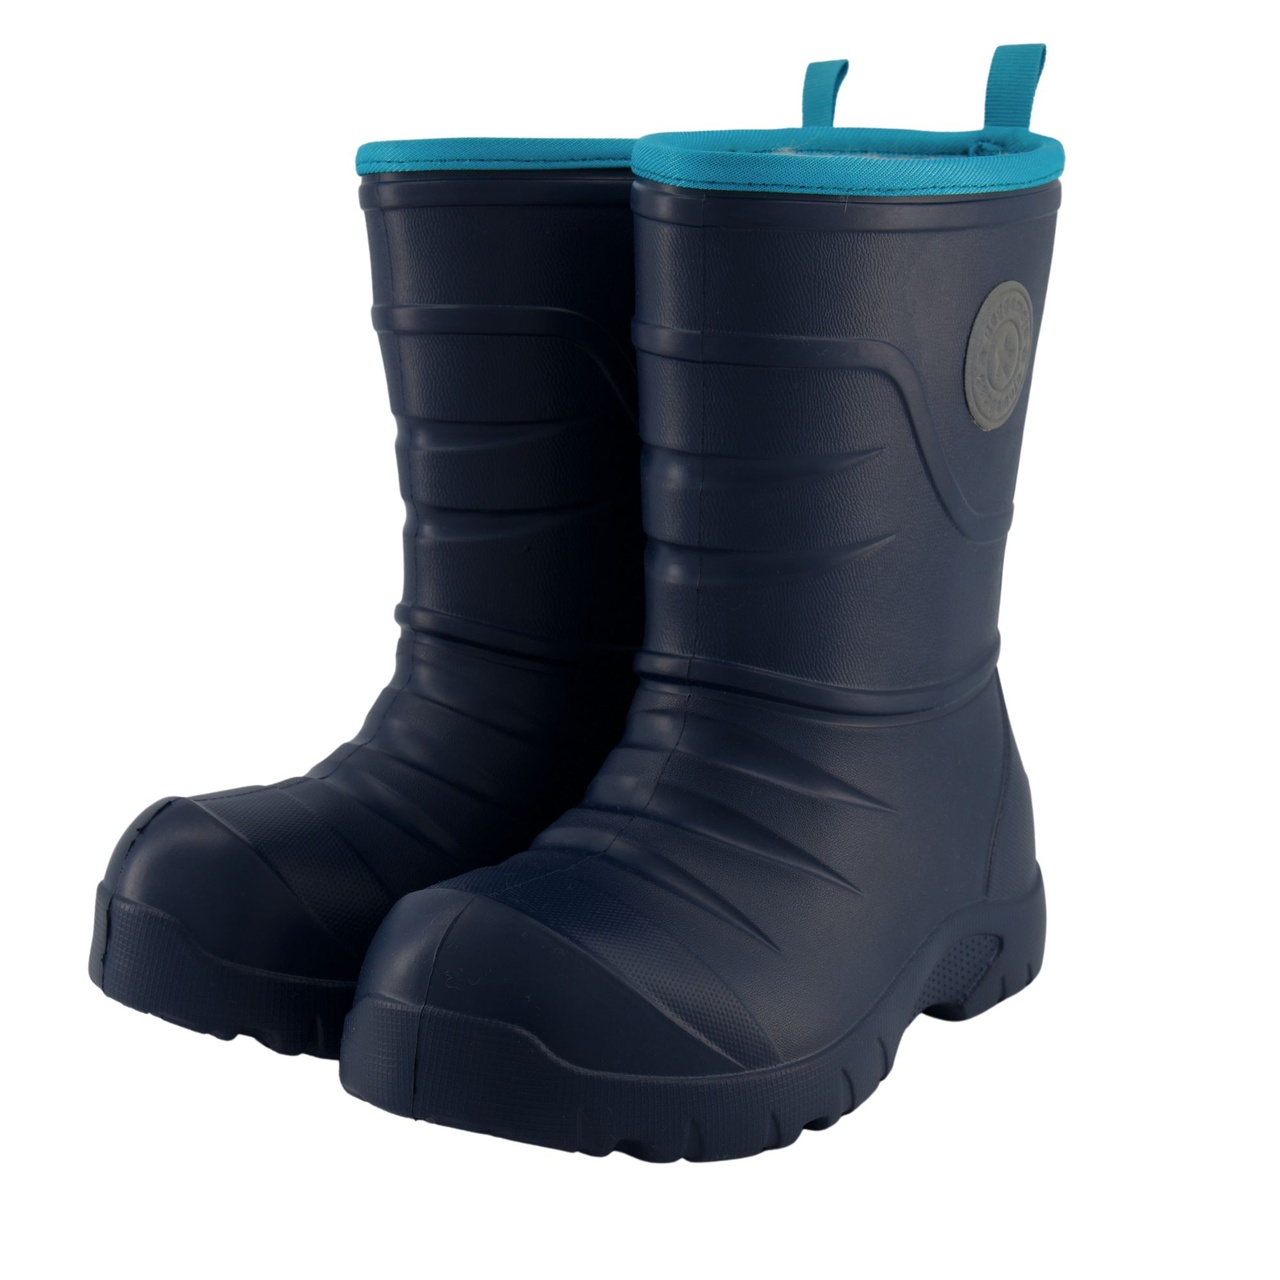 All-weather Boot Navy  28 (17,1 cm)